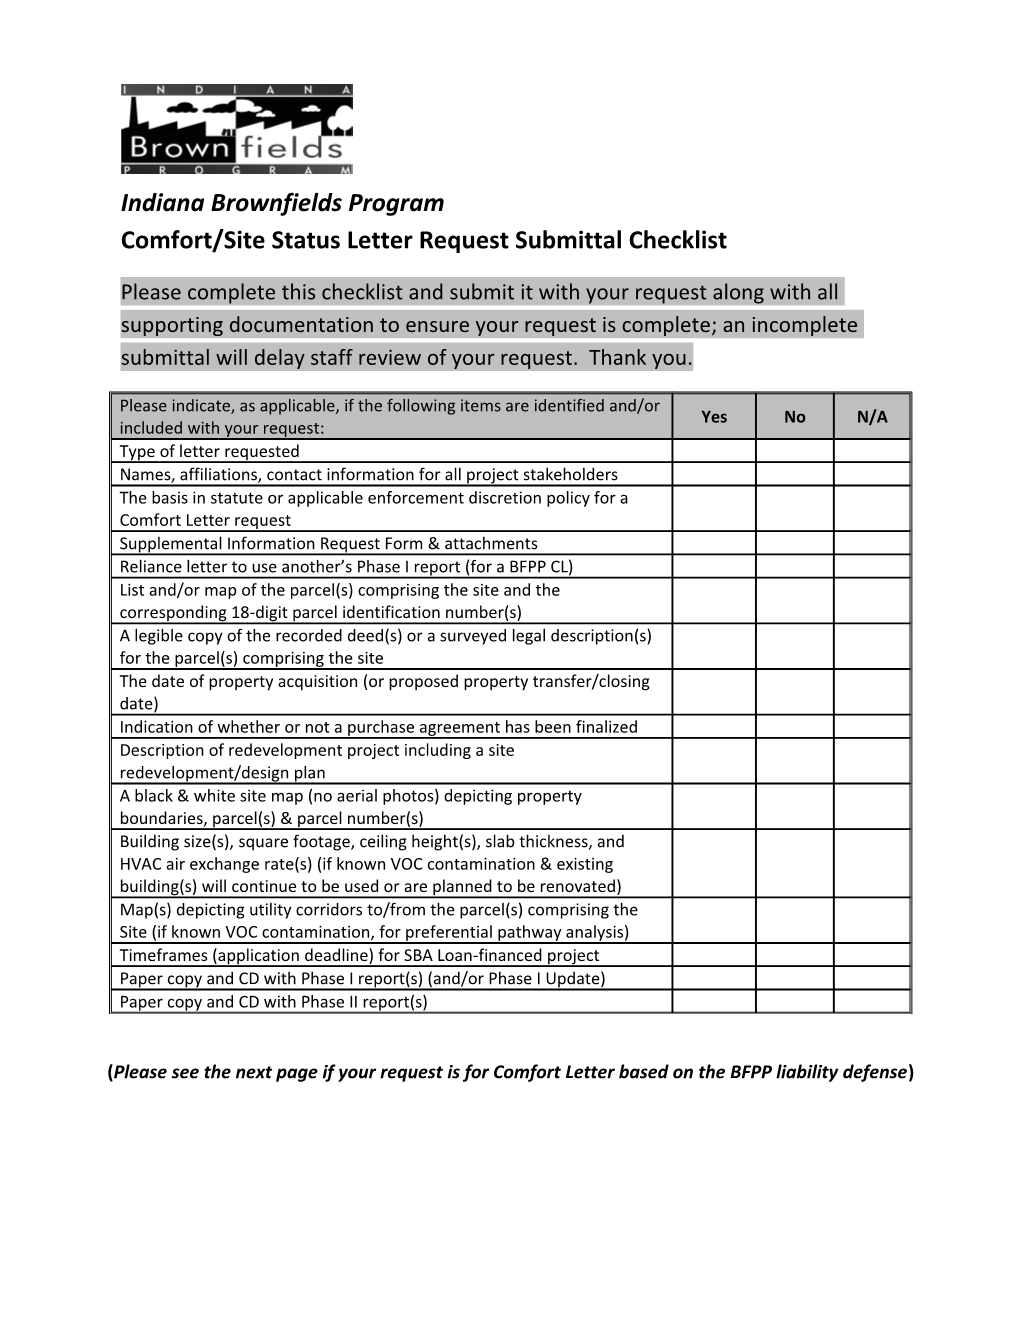 Comfort/Site Status Letter Request Submittal Checklist